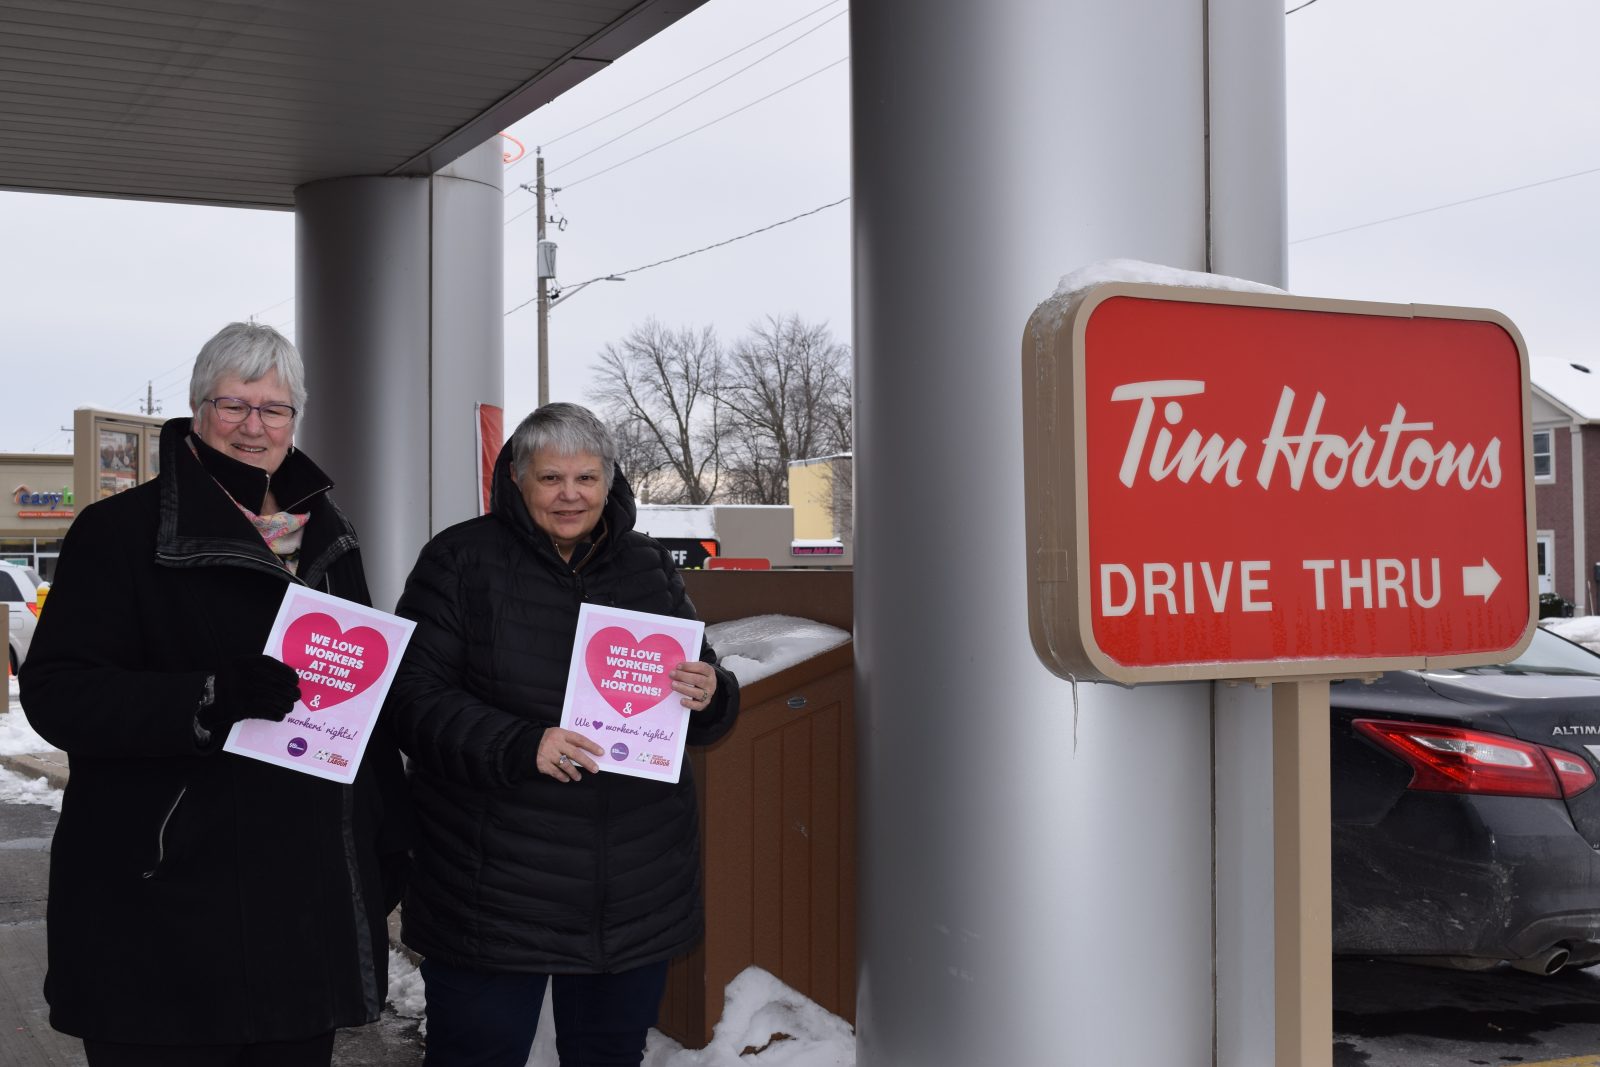 Labour Council gives some love to Tim Hortons workers